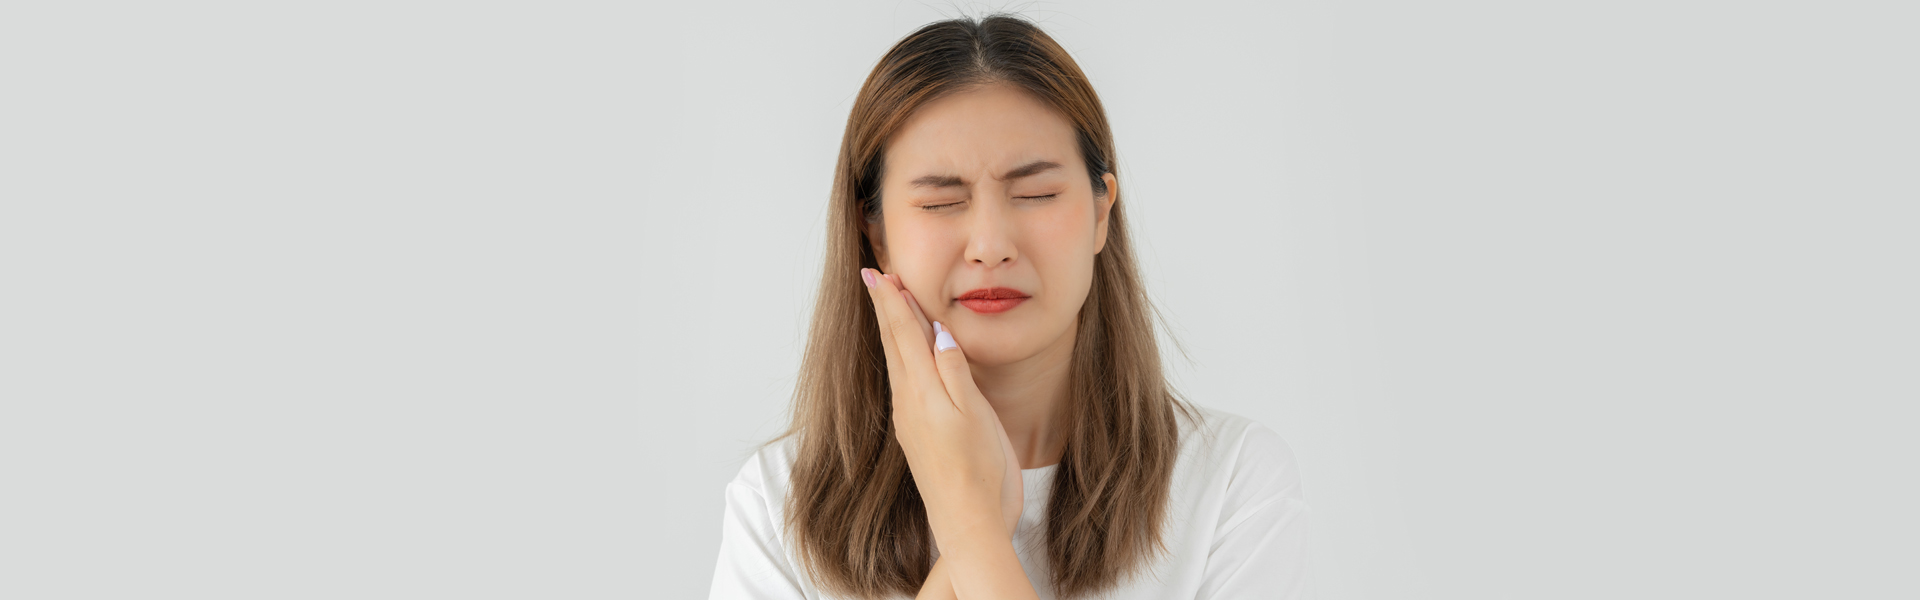 What Are the Warning Signs of Impending Dental Emergencies?